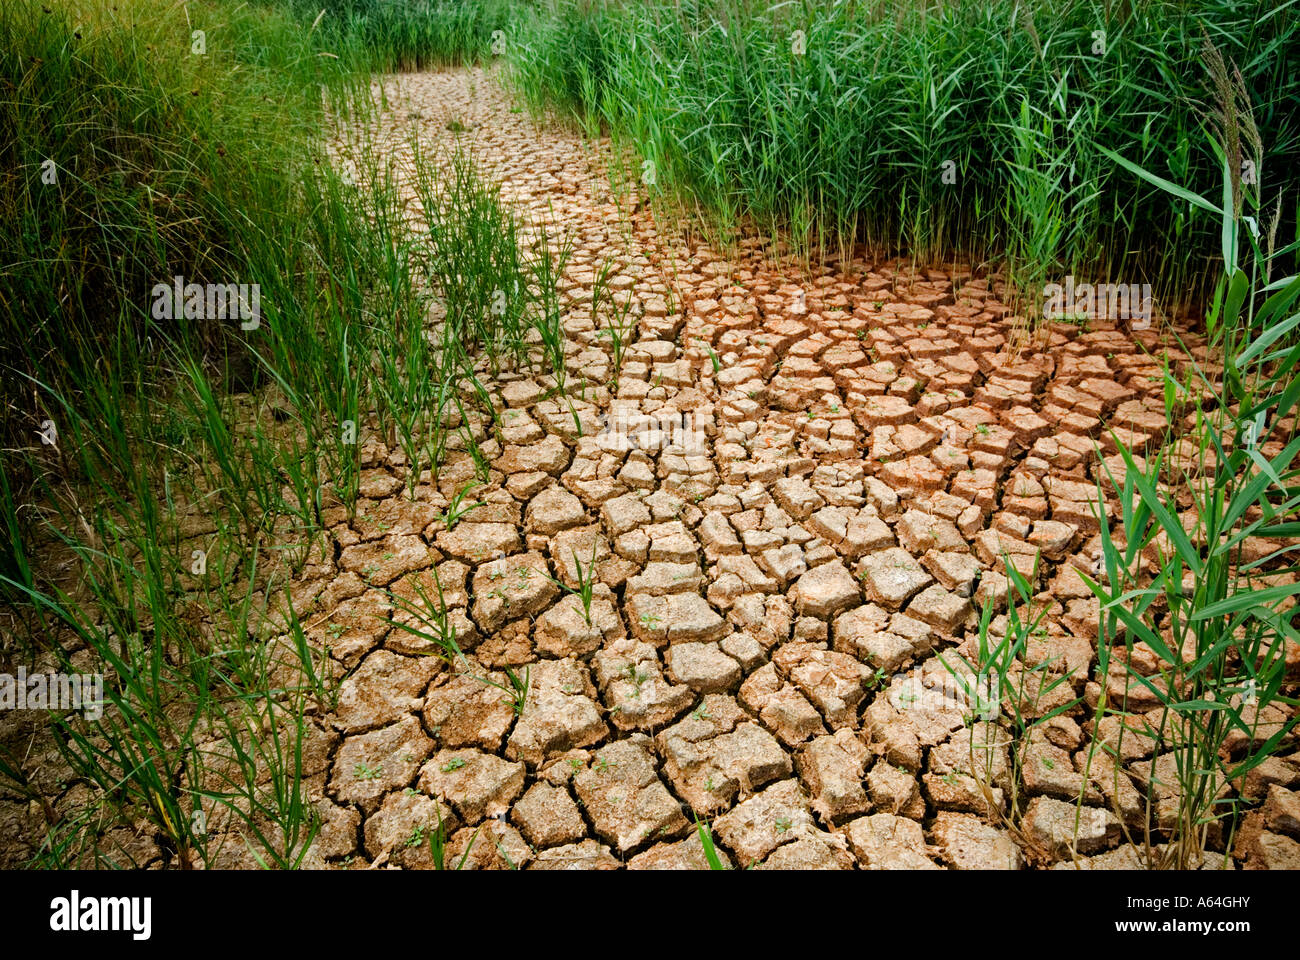 Drought 2006 Dried Up River Bed, Southern England. Stock Photo